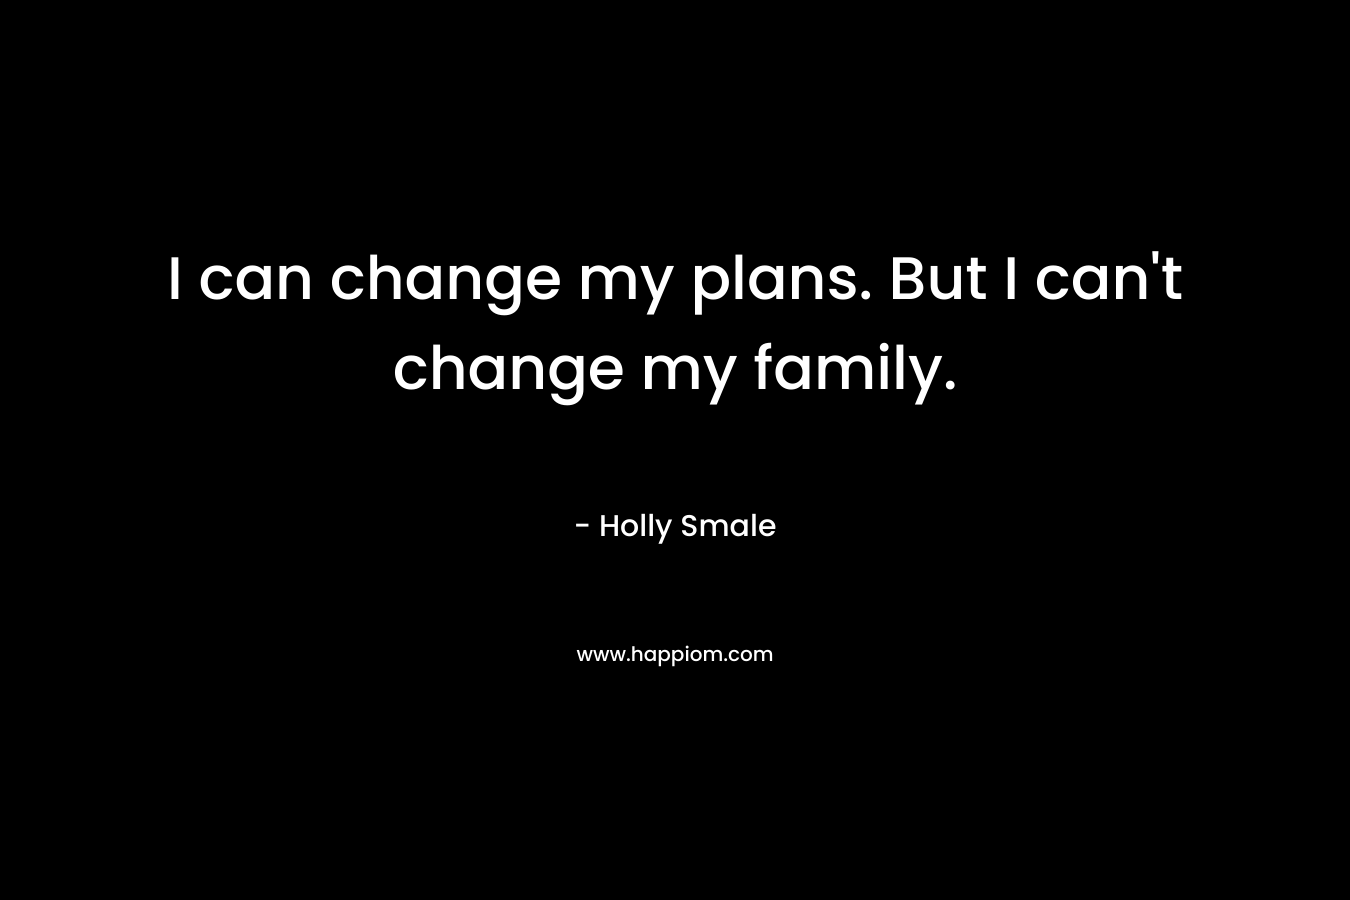 I can change my plans. But I can’t change my family. – Holly Smale